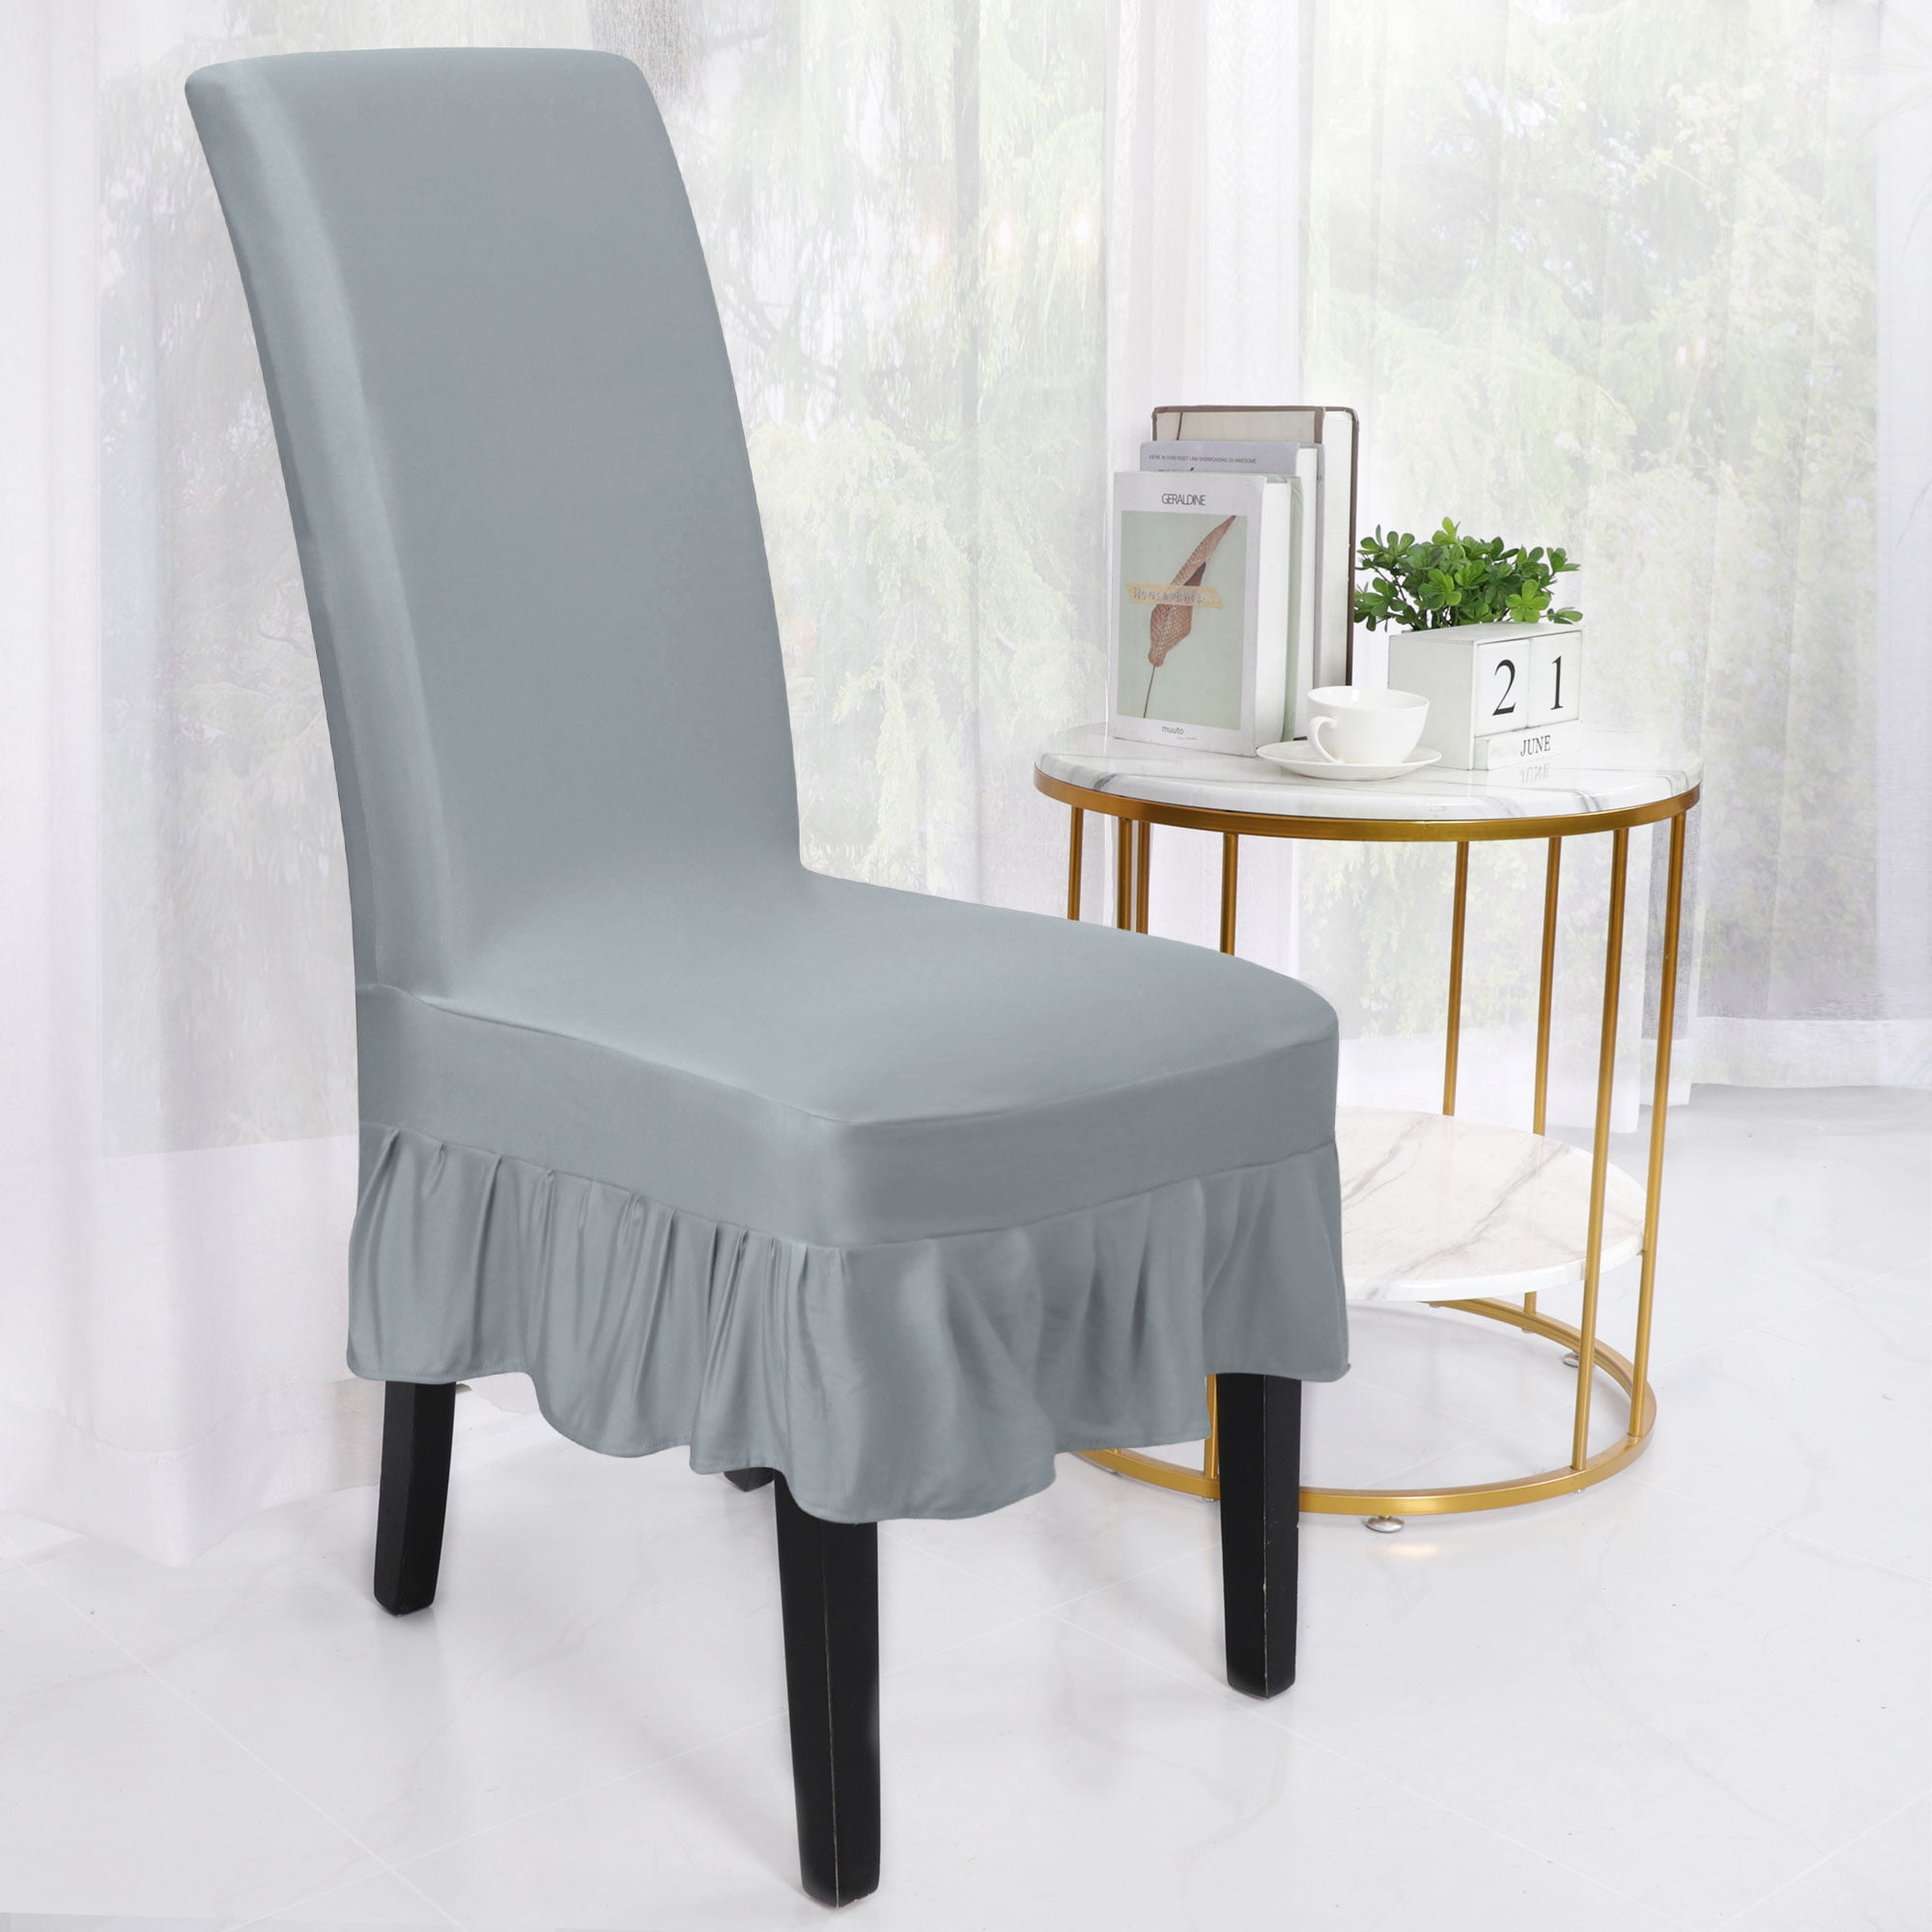 Details about   Chair Cover Banquet Hotel Home Room Elastic Protective Anti-dirty Slipcover Case 